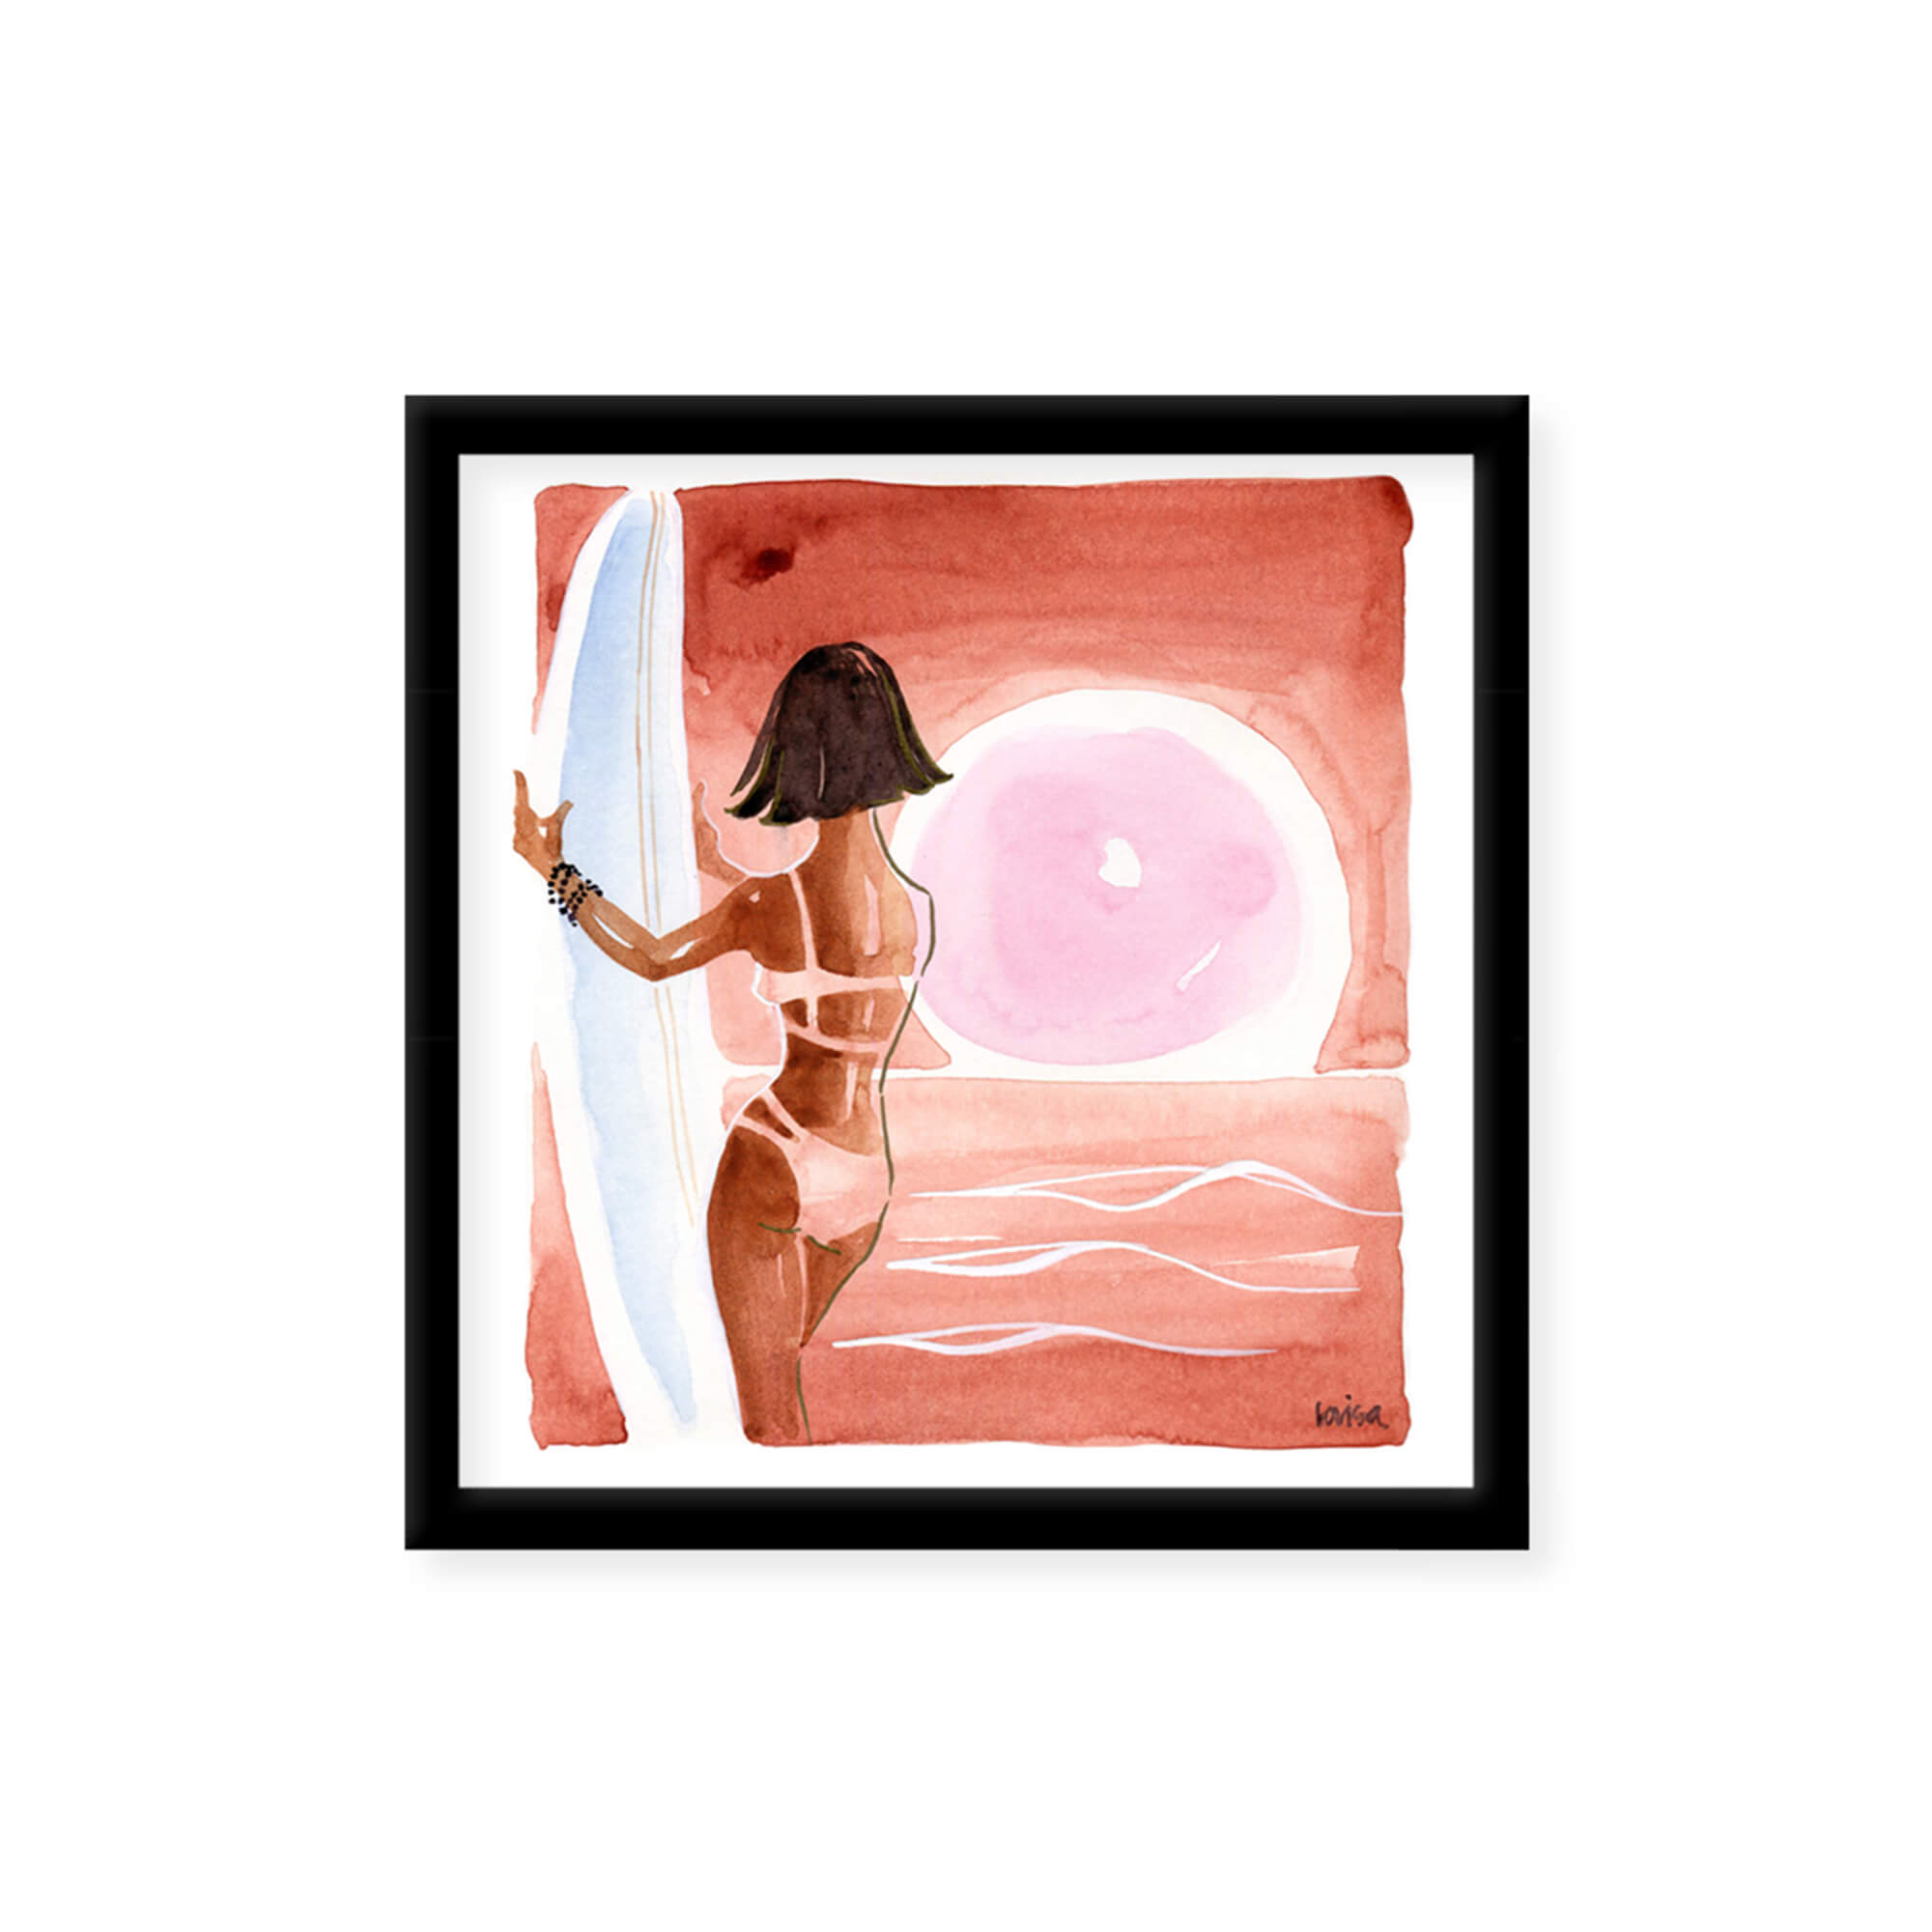 Framed paper giclée print of a watercolor artwork featuring a woman holding a surfboard while enjoying the sunset view by Hawaii artist Lovisa Oliv